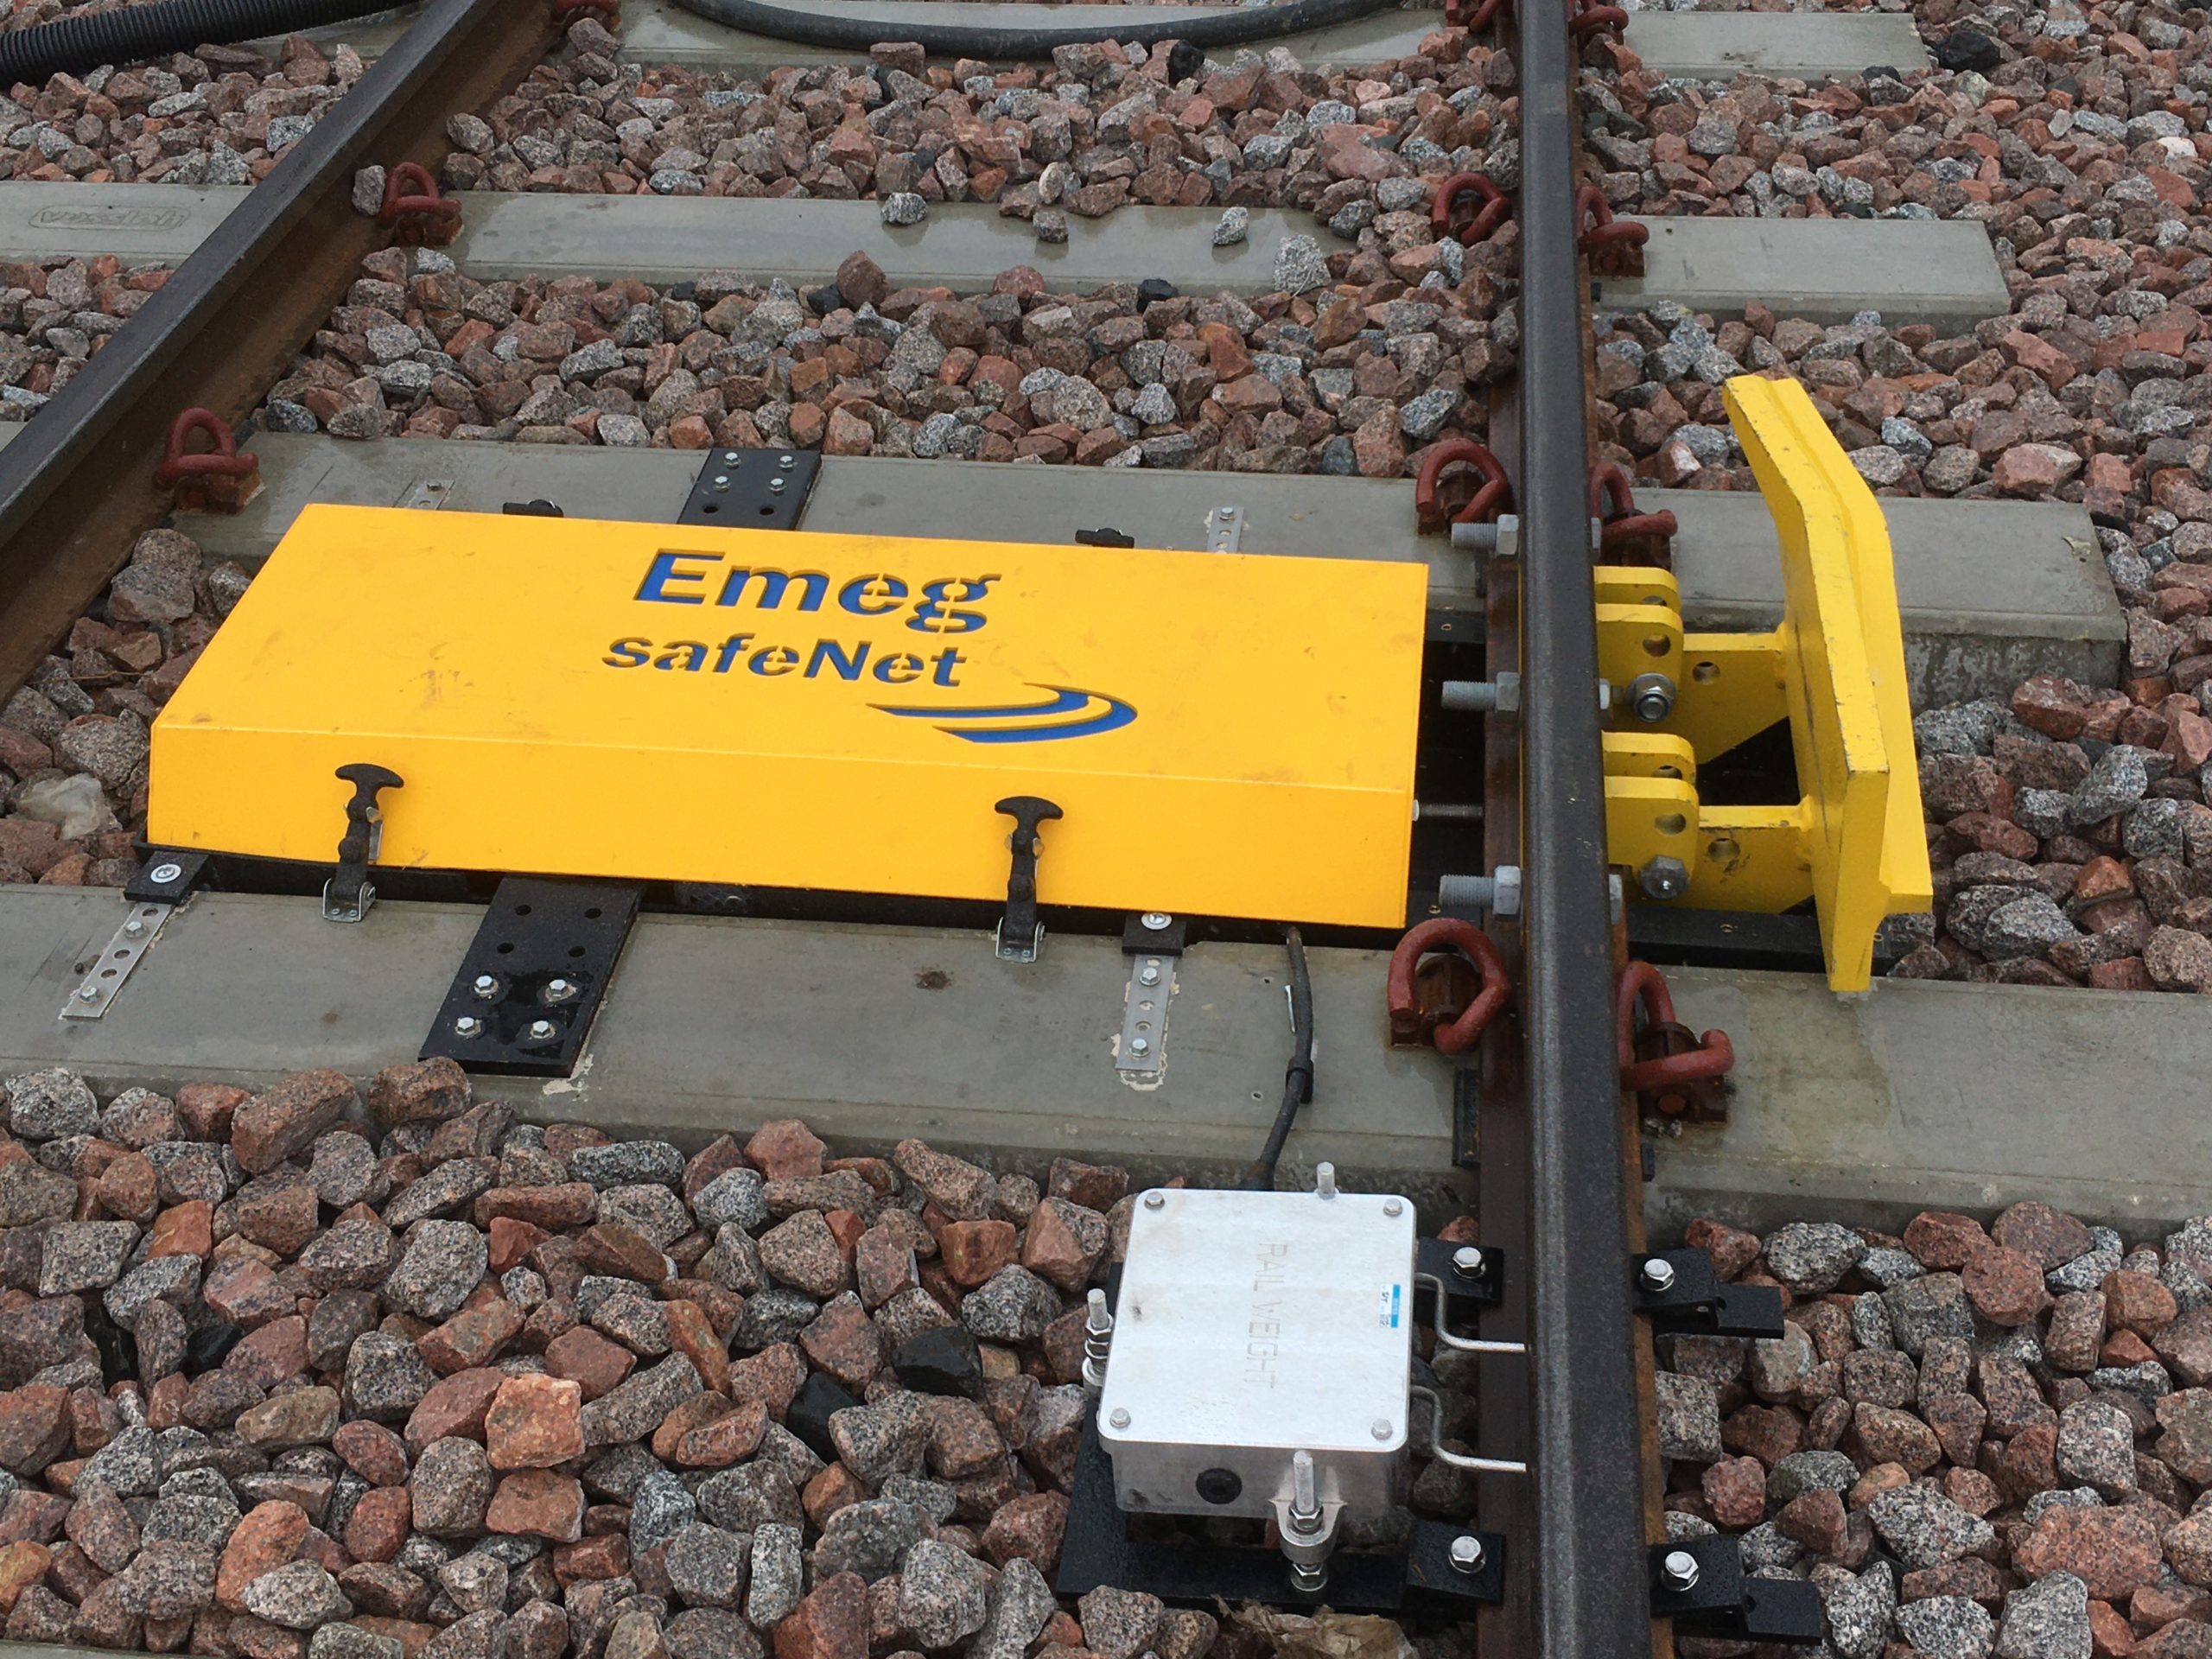 safeNet automatic derailer for rail depot protection